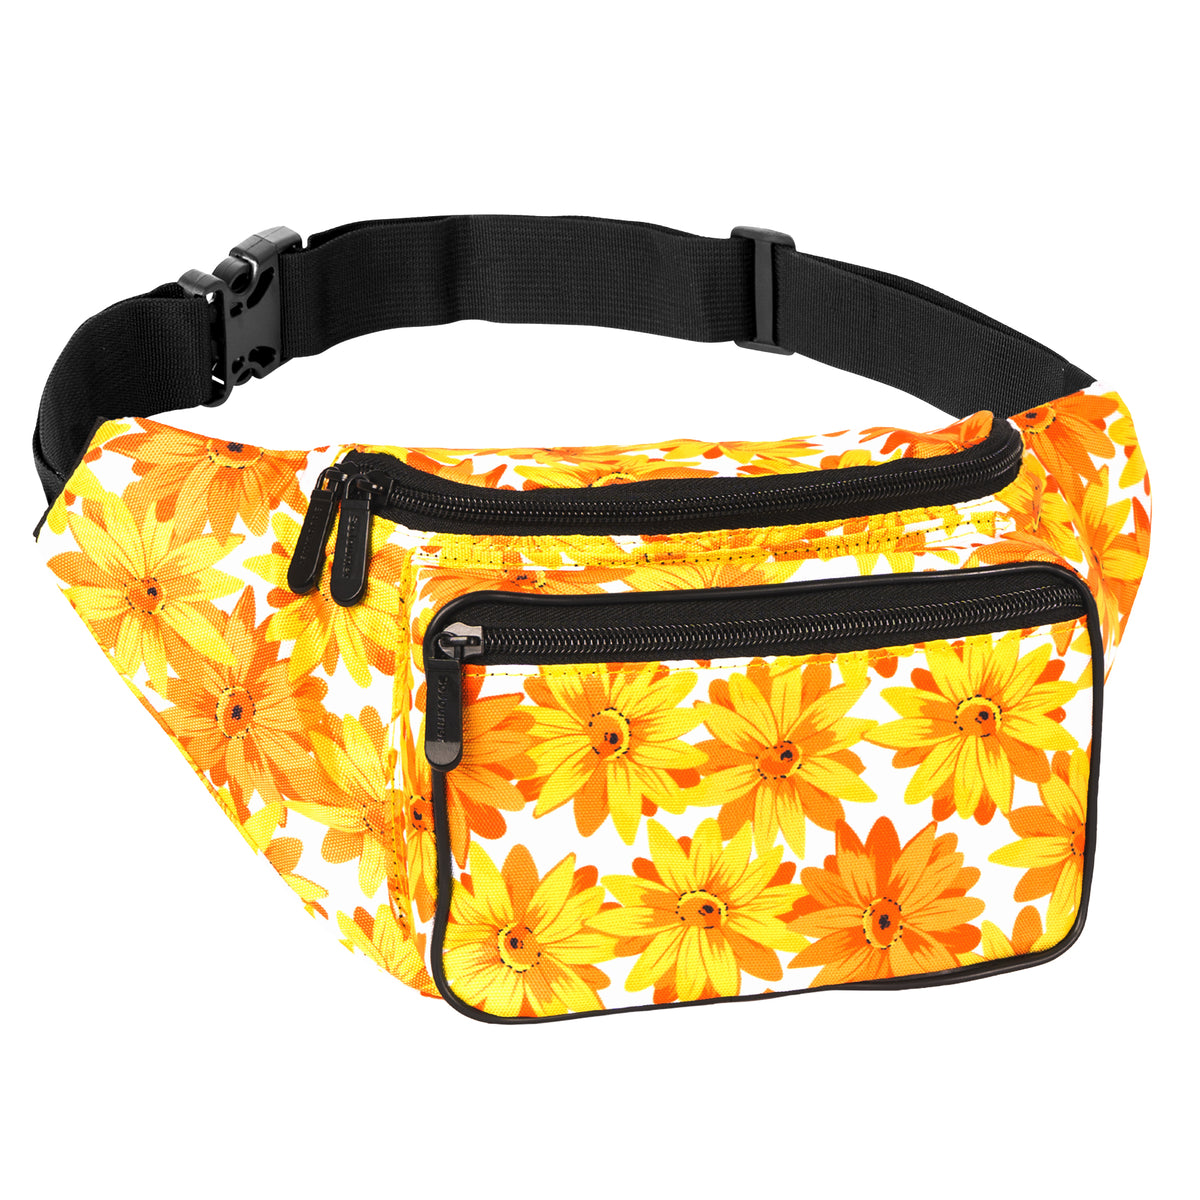 Floral Sunflower Fanny Pack (Yellow / Orange)